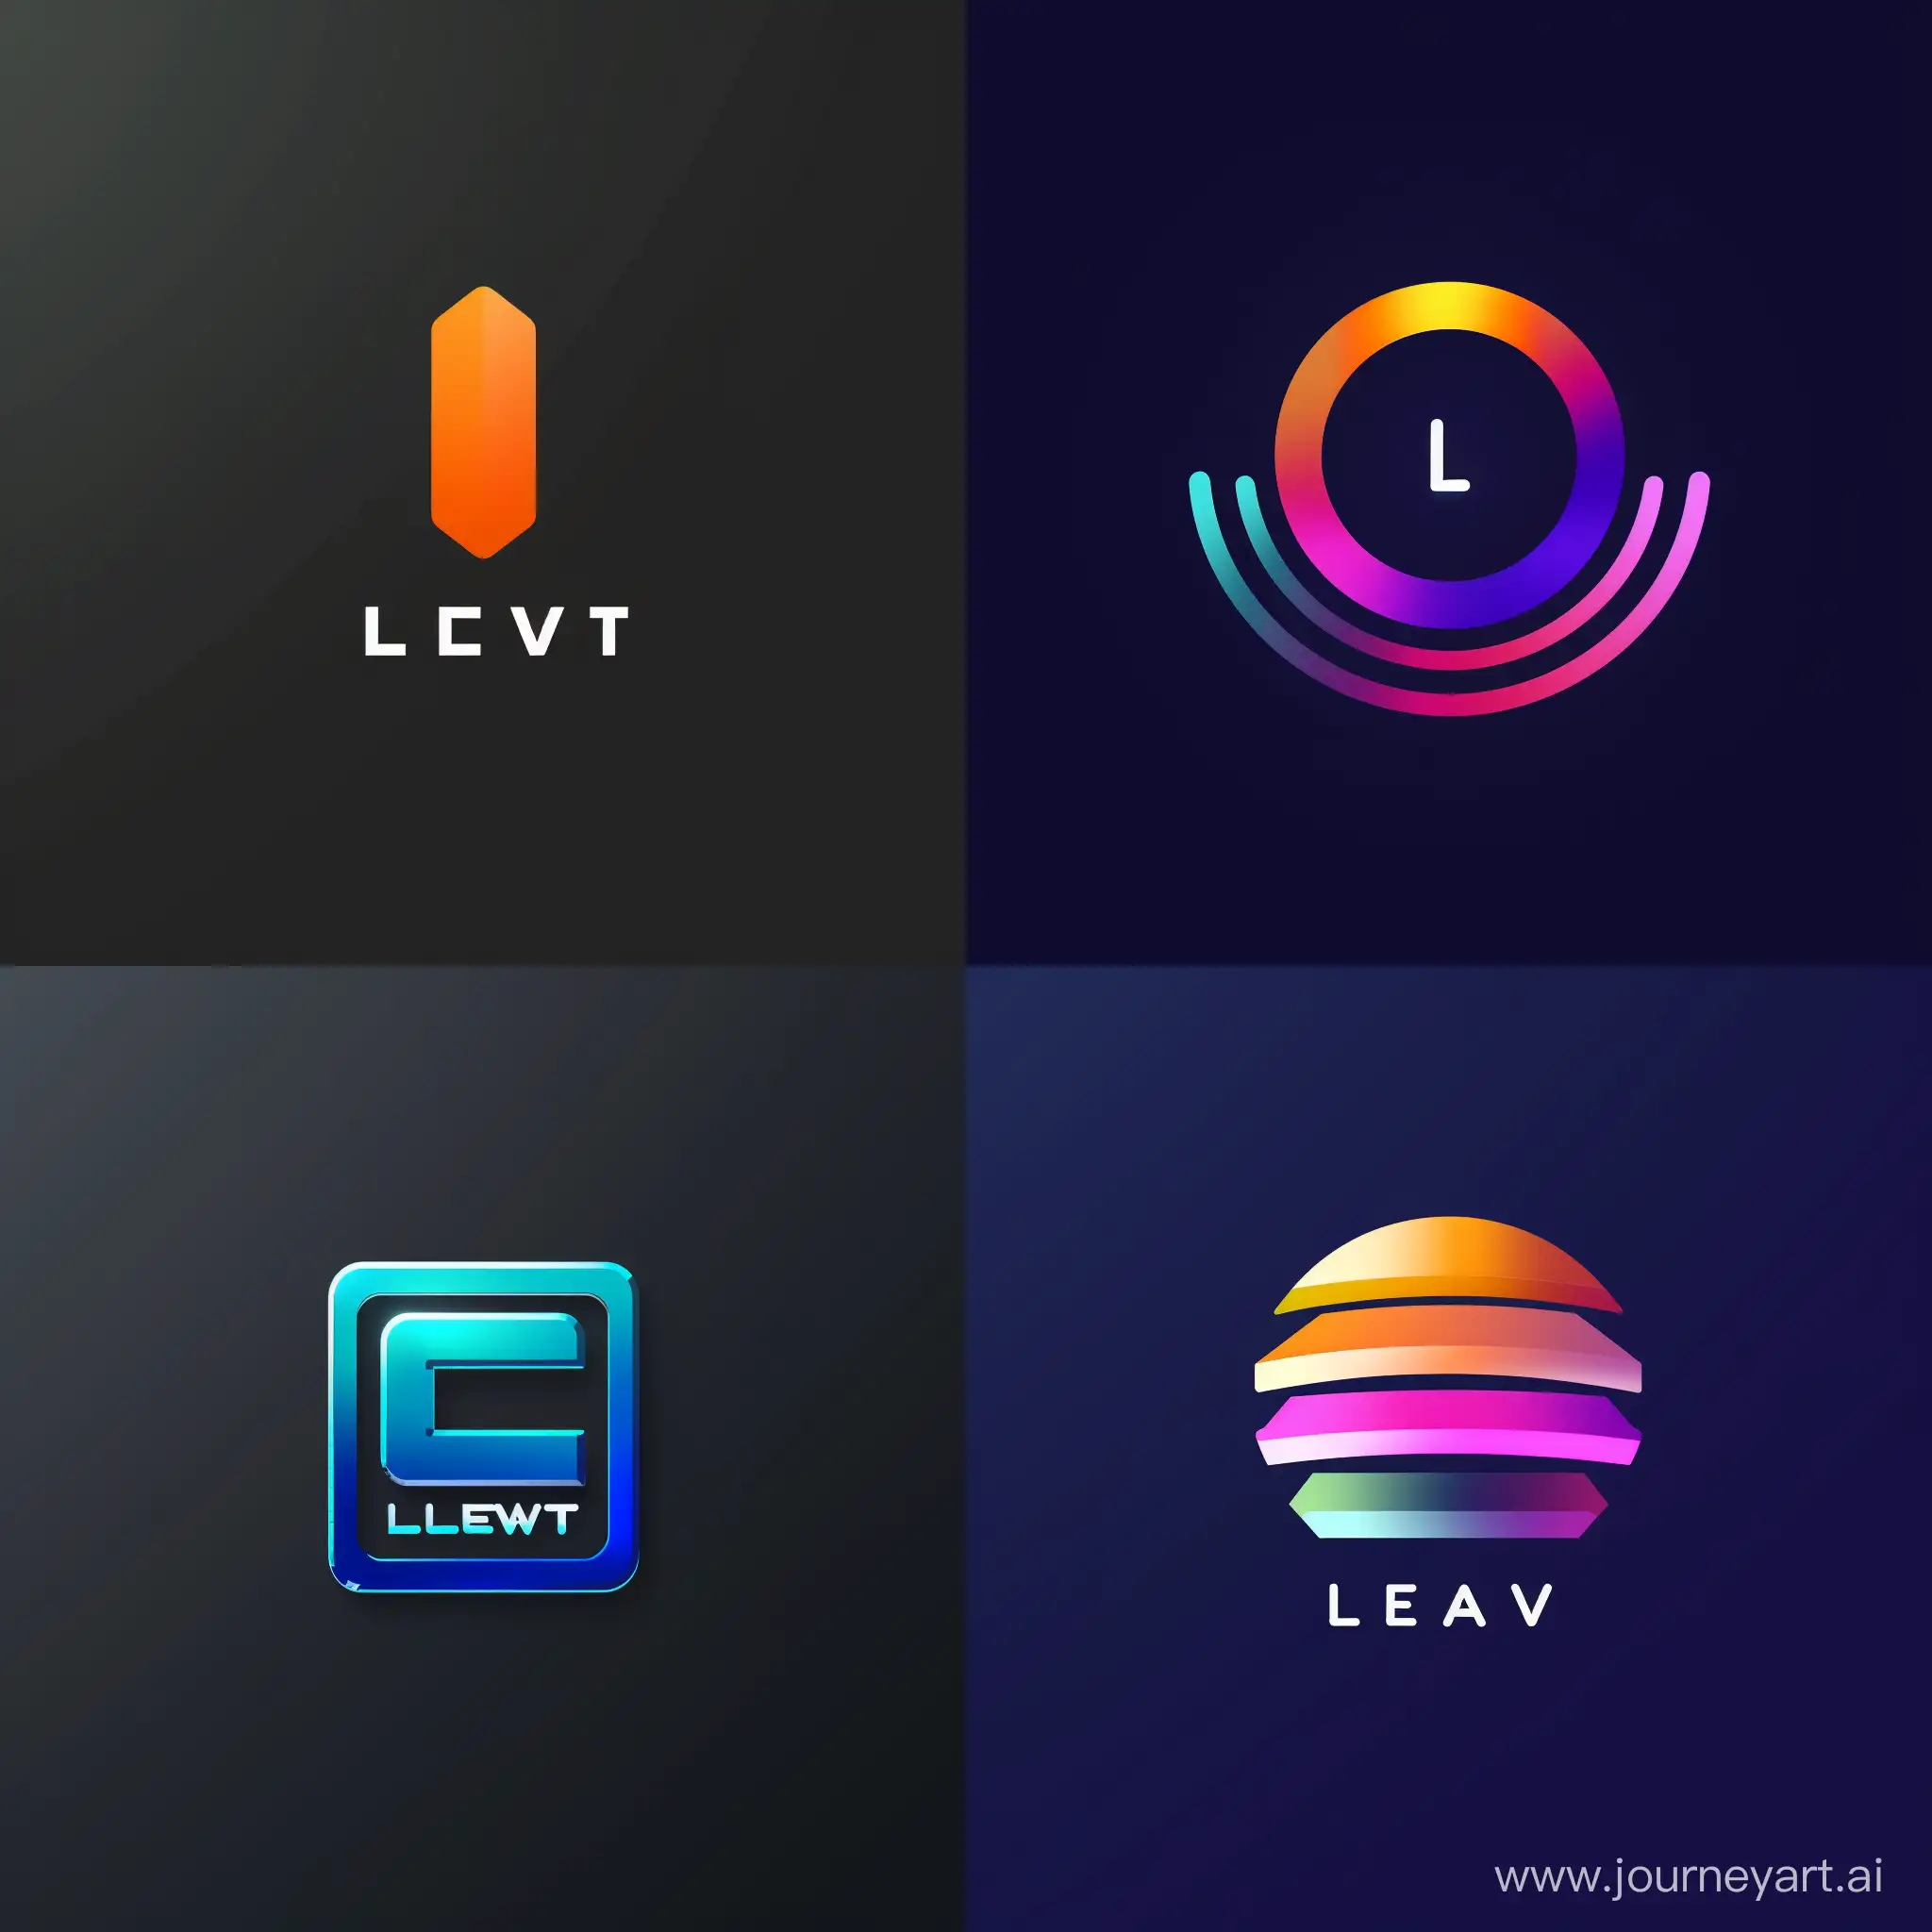 A modern, minimalist logo for a livestreaming platform called "Level" --style raw